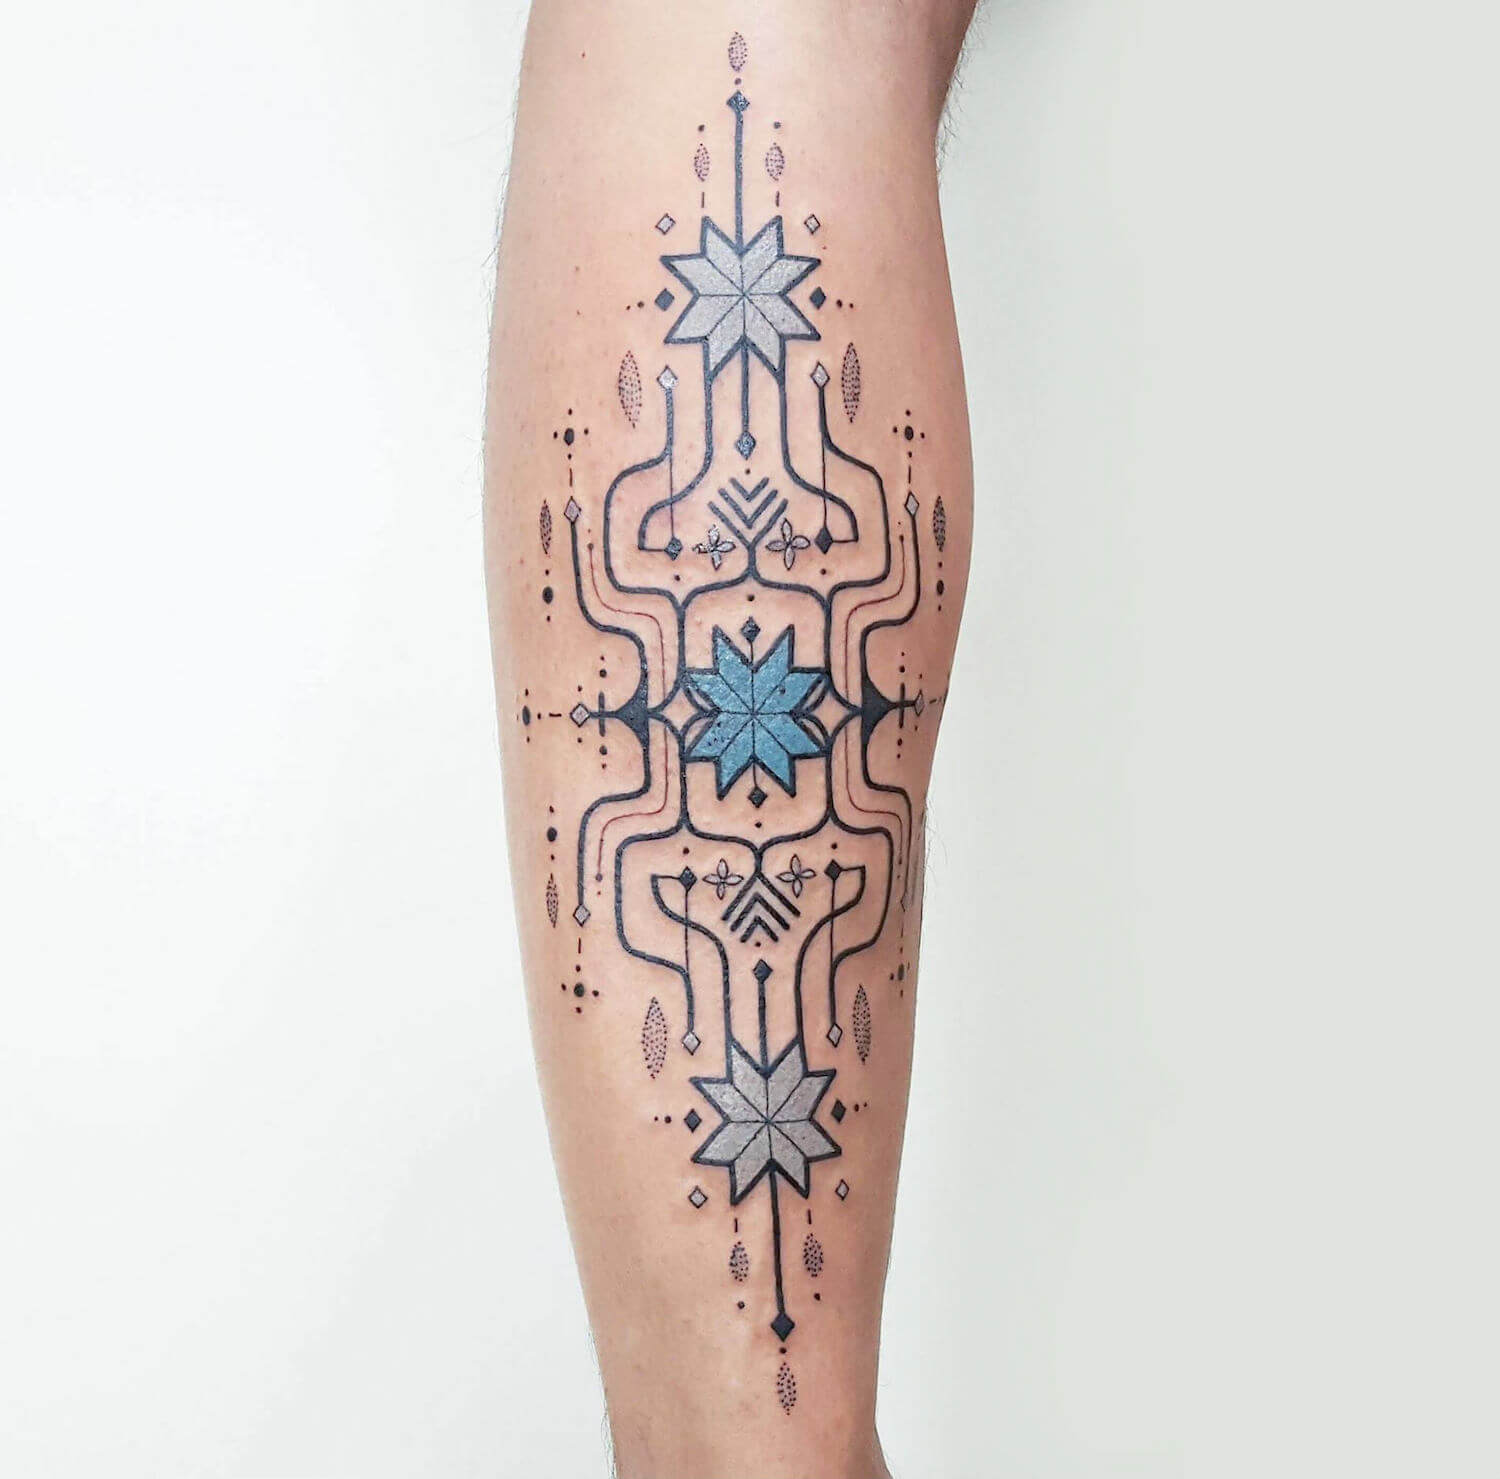 Brian Gomes Creates Magnificent Tattoos Inspired By The Art Of Shamanic  Philosophy | FREEYORK